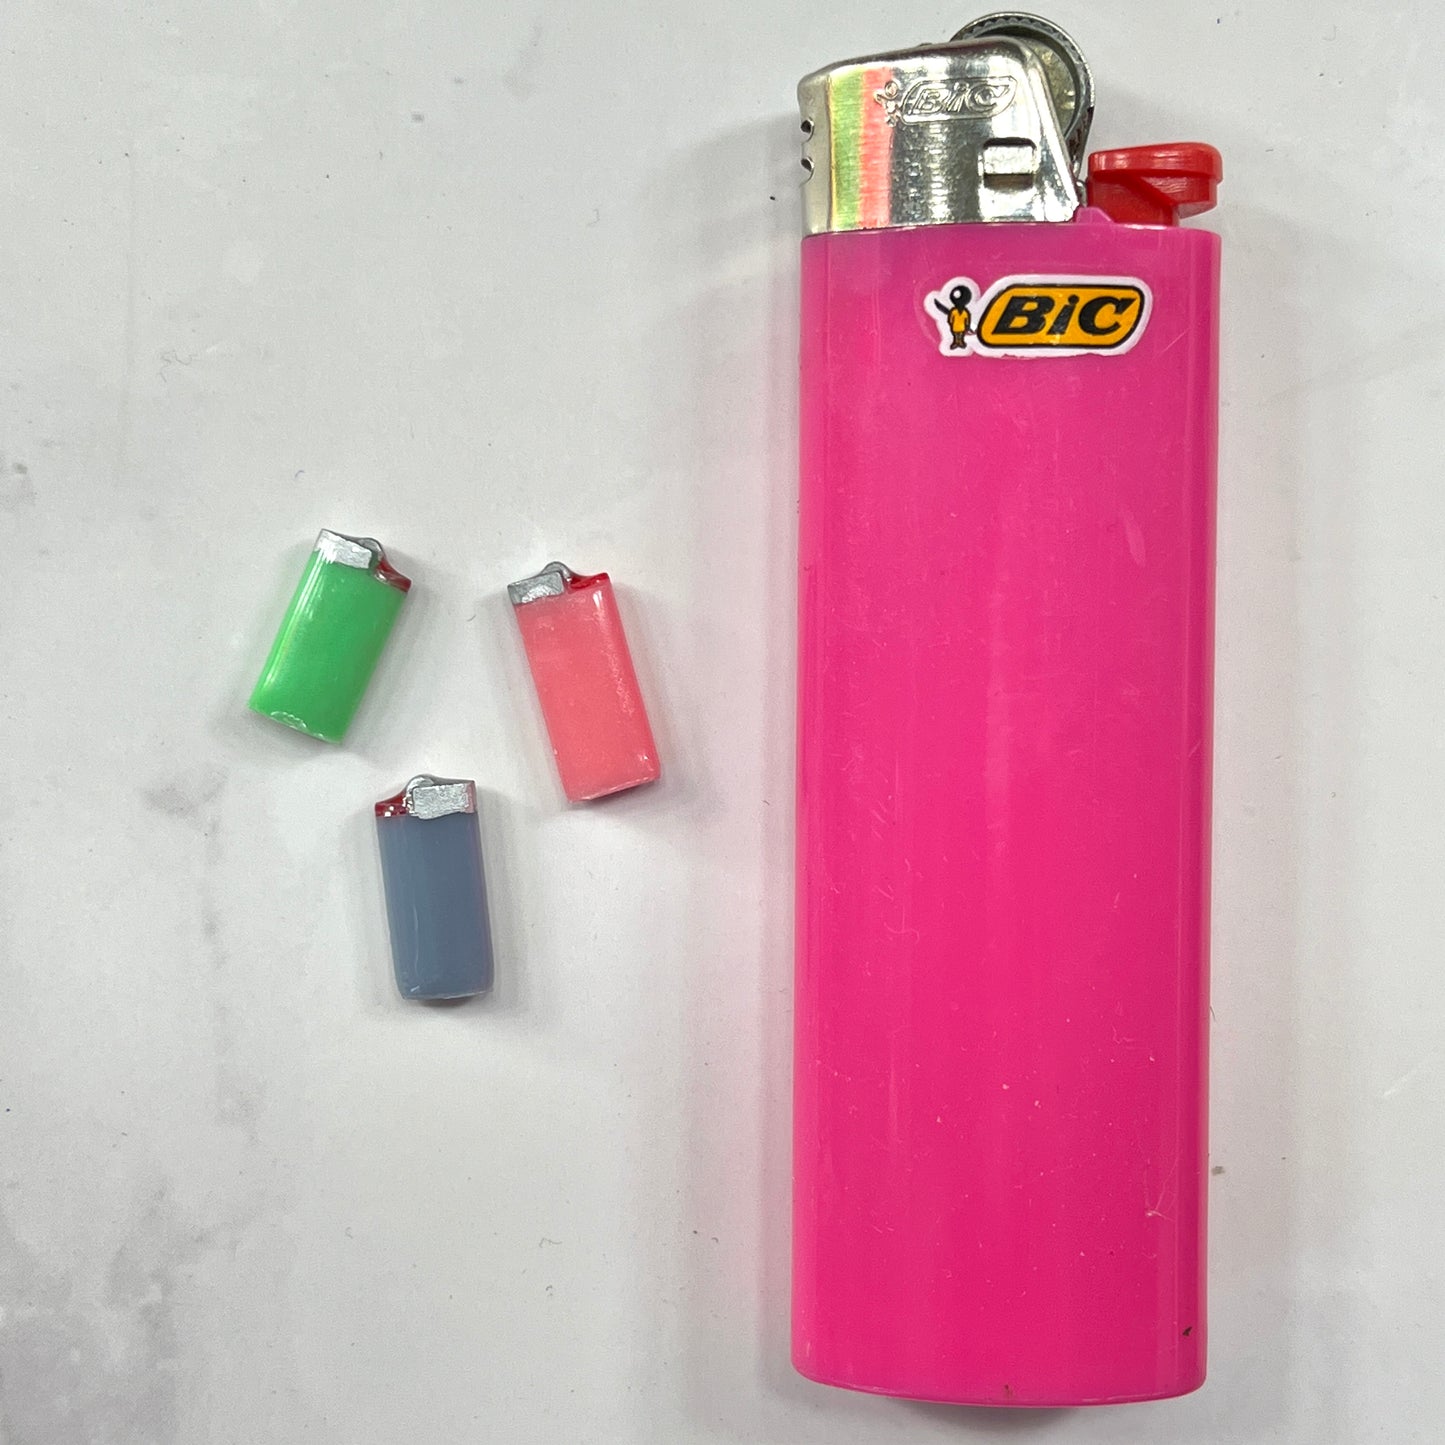 3 Pack of Miniature Lighters (1/6 scale)